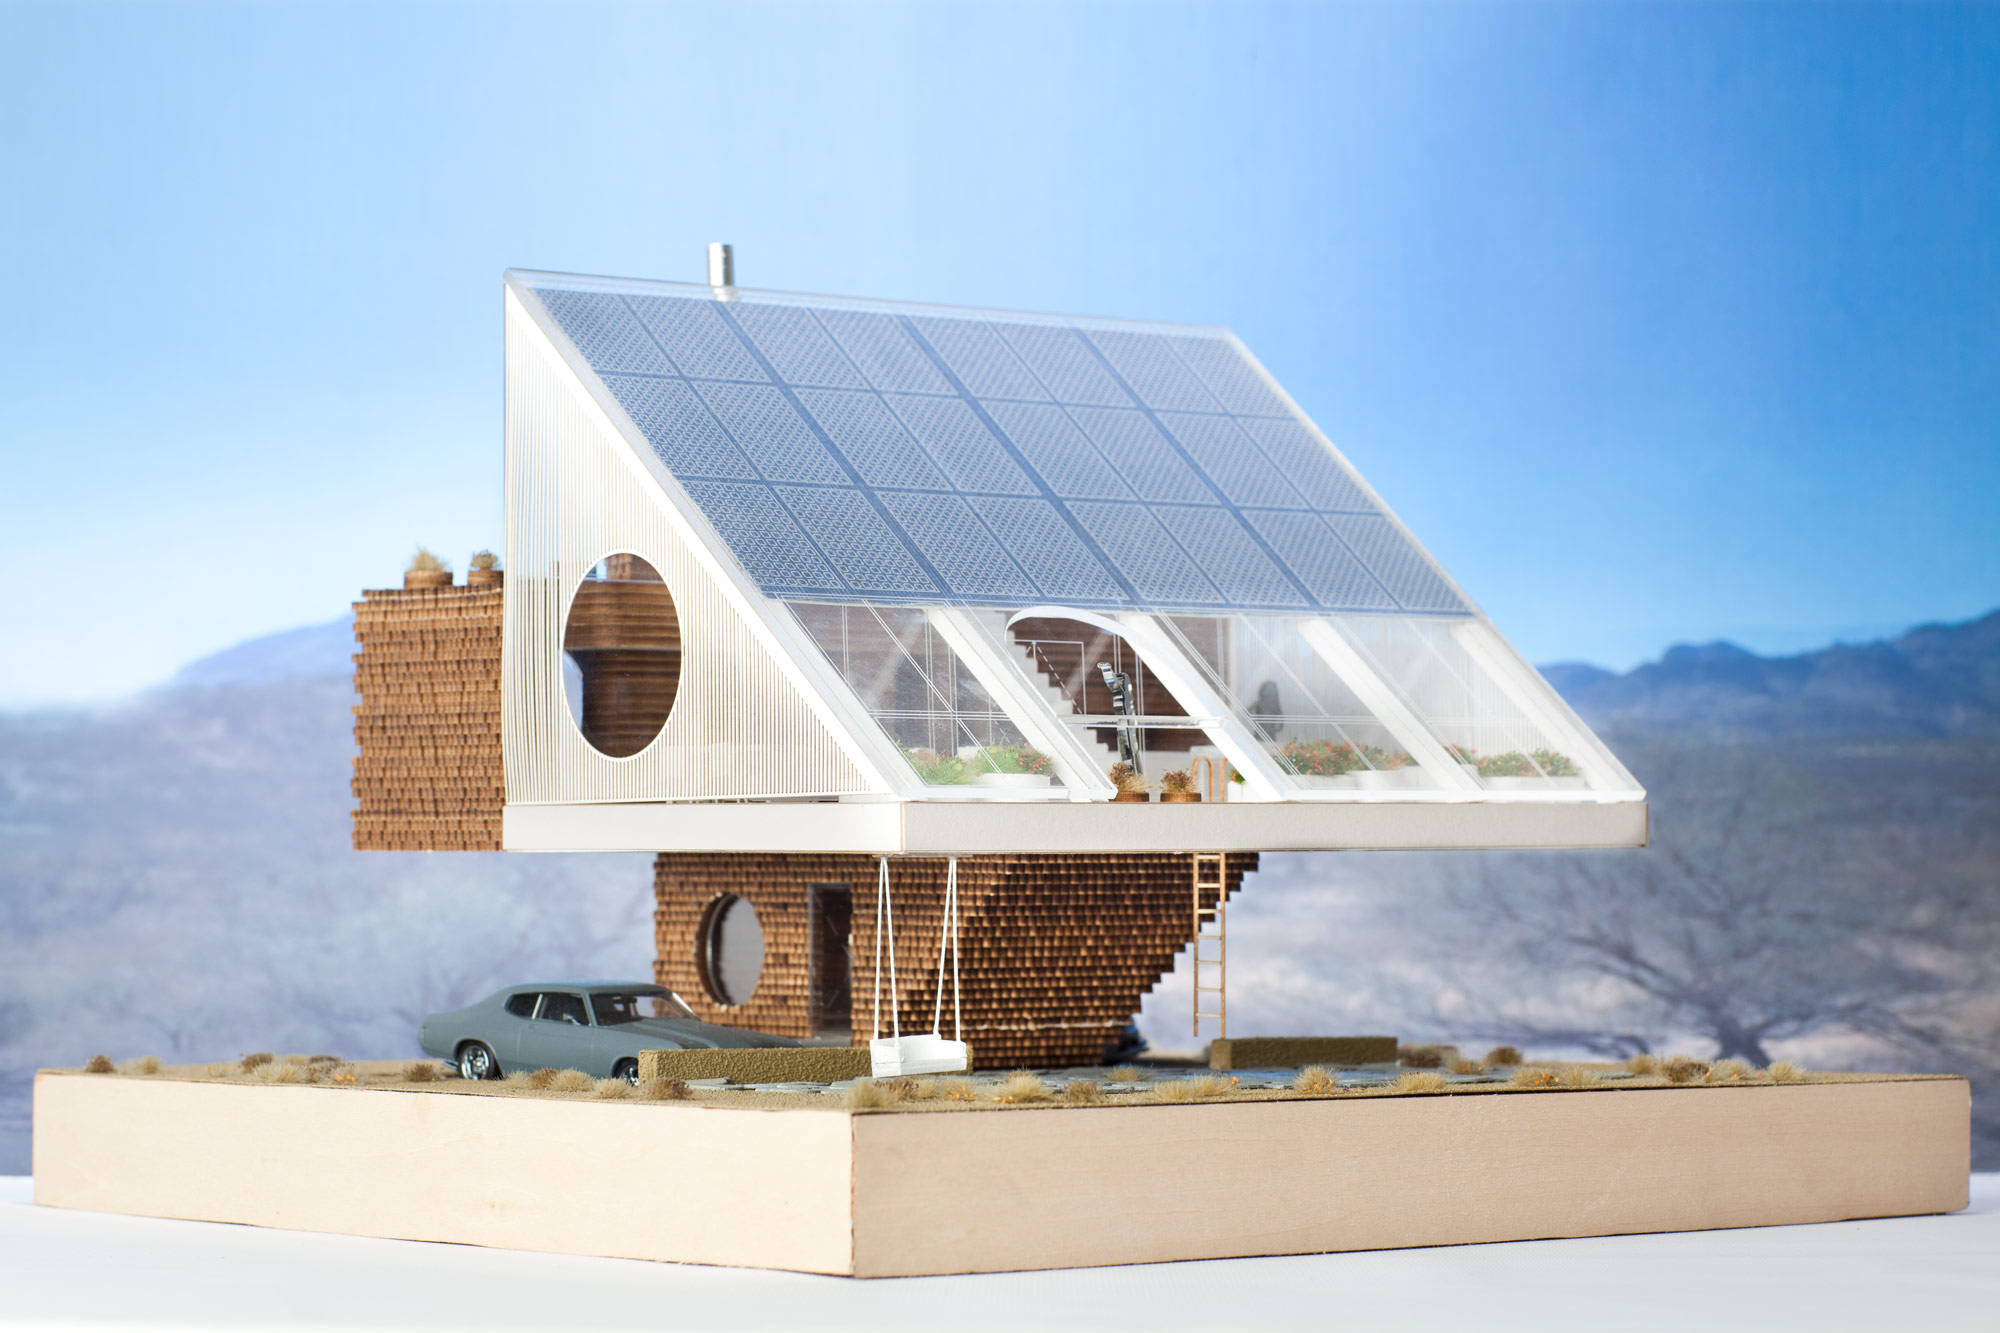 Once built, the Arizona House in Tubac, Arizona, by WORKac will flaunt its sustainable features: The form is generated diagrammatically by lifting the house for ventilation, creating a sun-oriented angled massing for photovoltaic power collection and solar heat gain, and visually exaggerating a large thermal mass. (Courtesy WORKac)